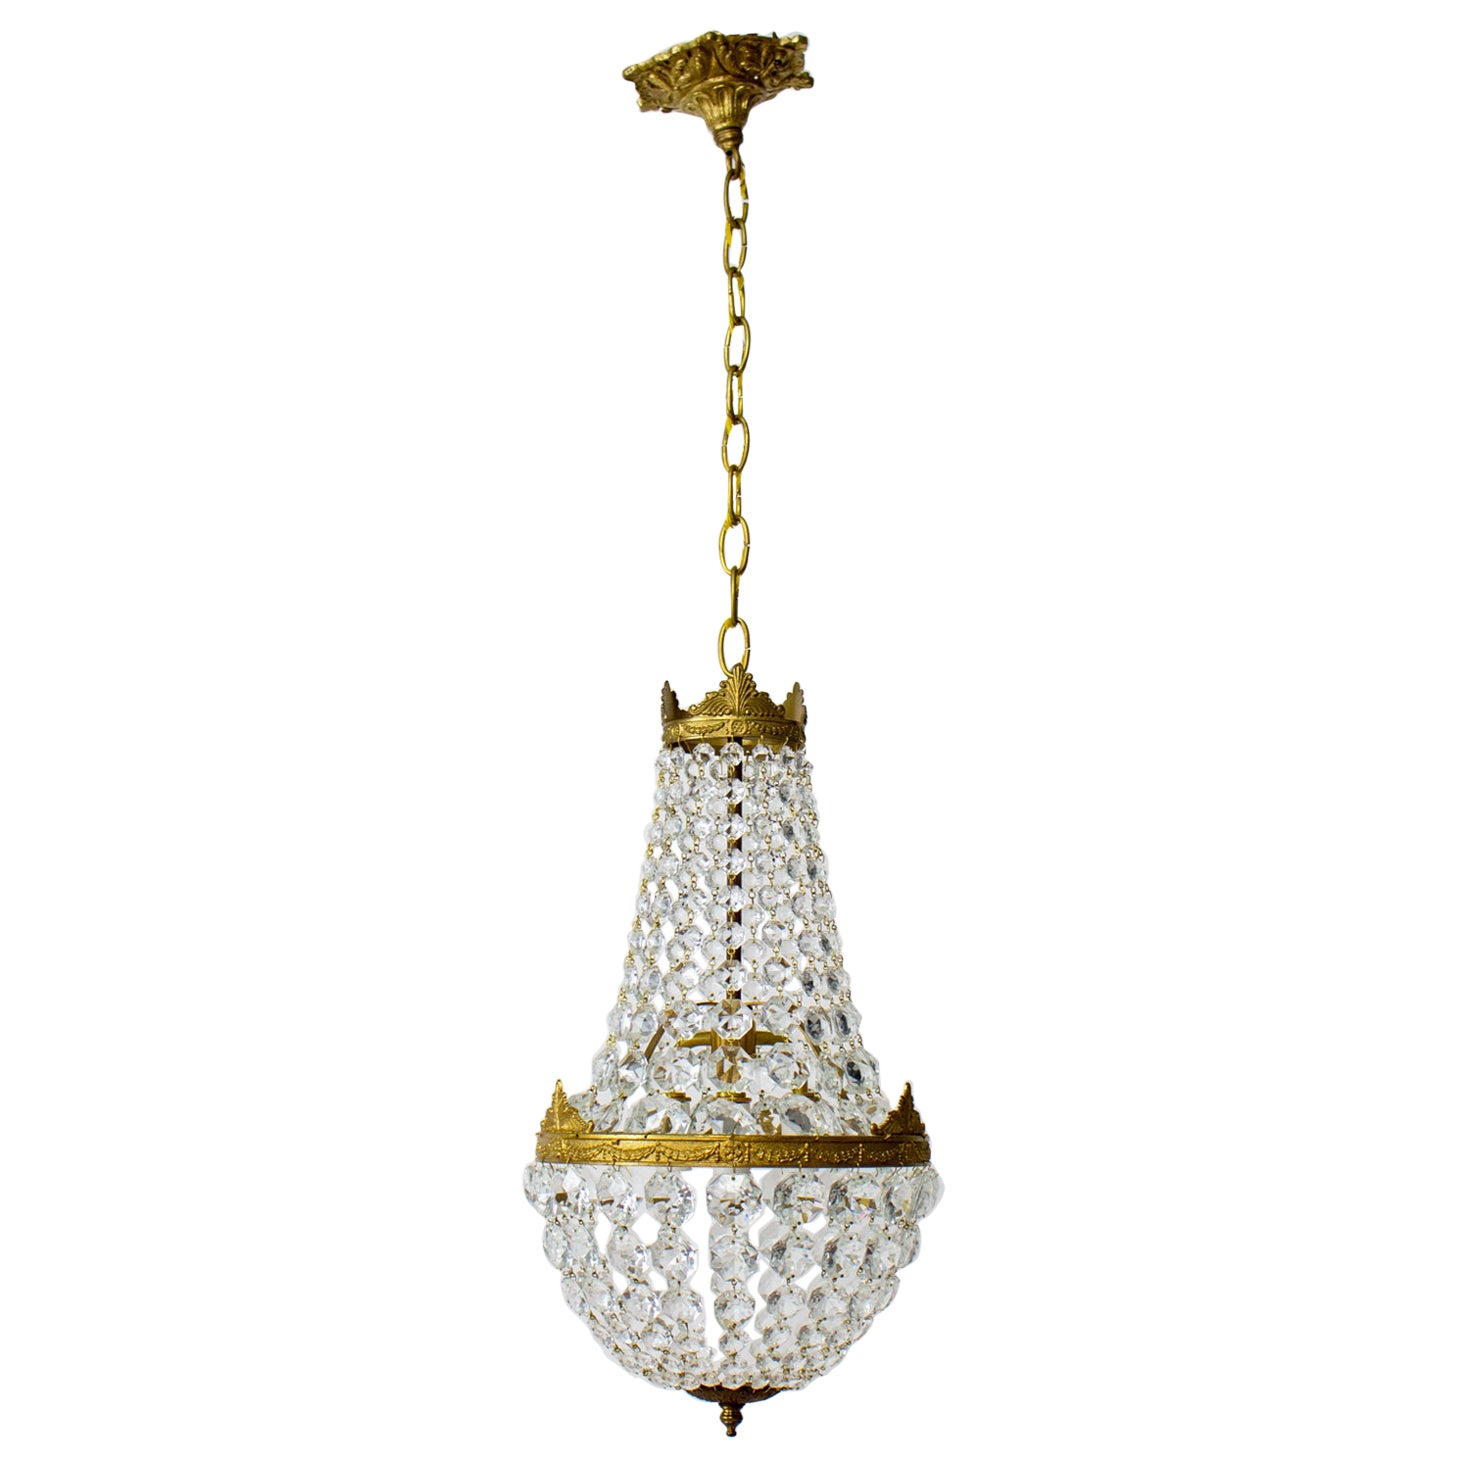 Small Crystal Basket Fixture